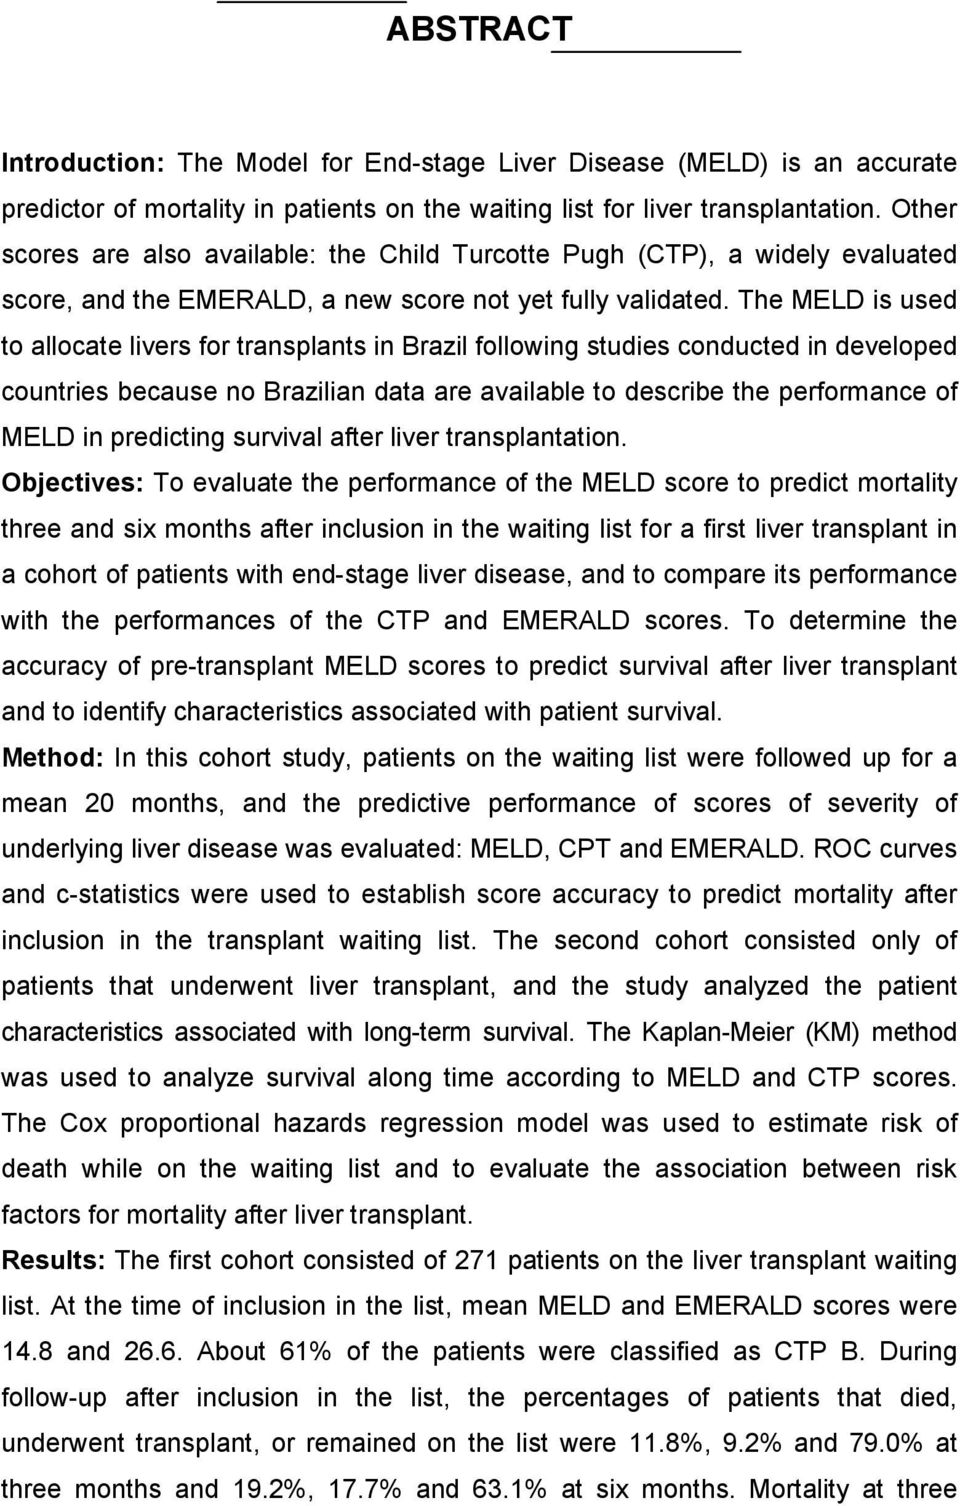 The MELD is used to allocate livers for transplants in Brazil following studies conducted in developed countries because no Brazilian data are available to describe the performance of MELD in